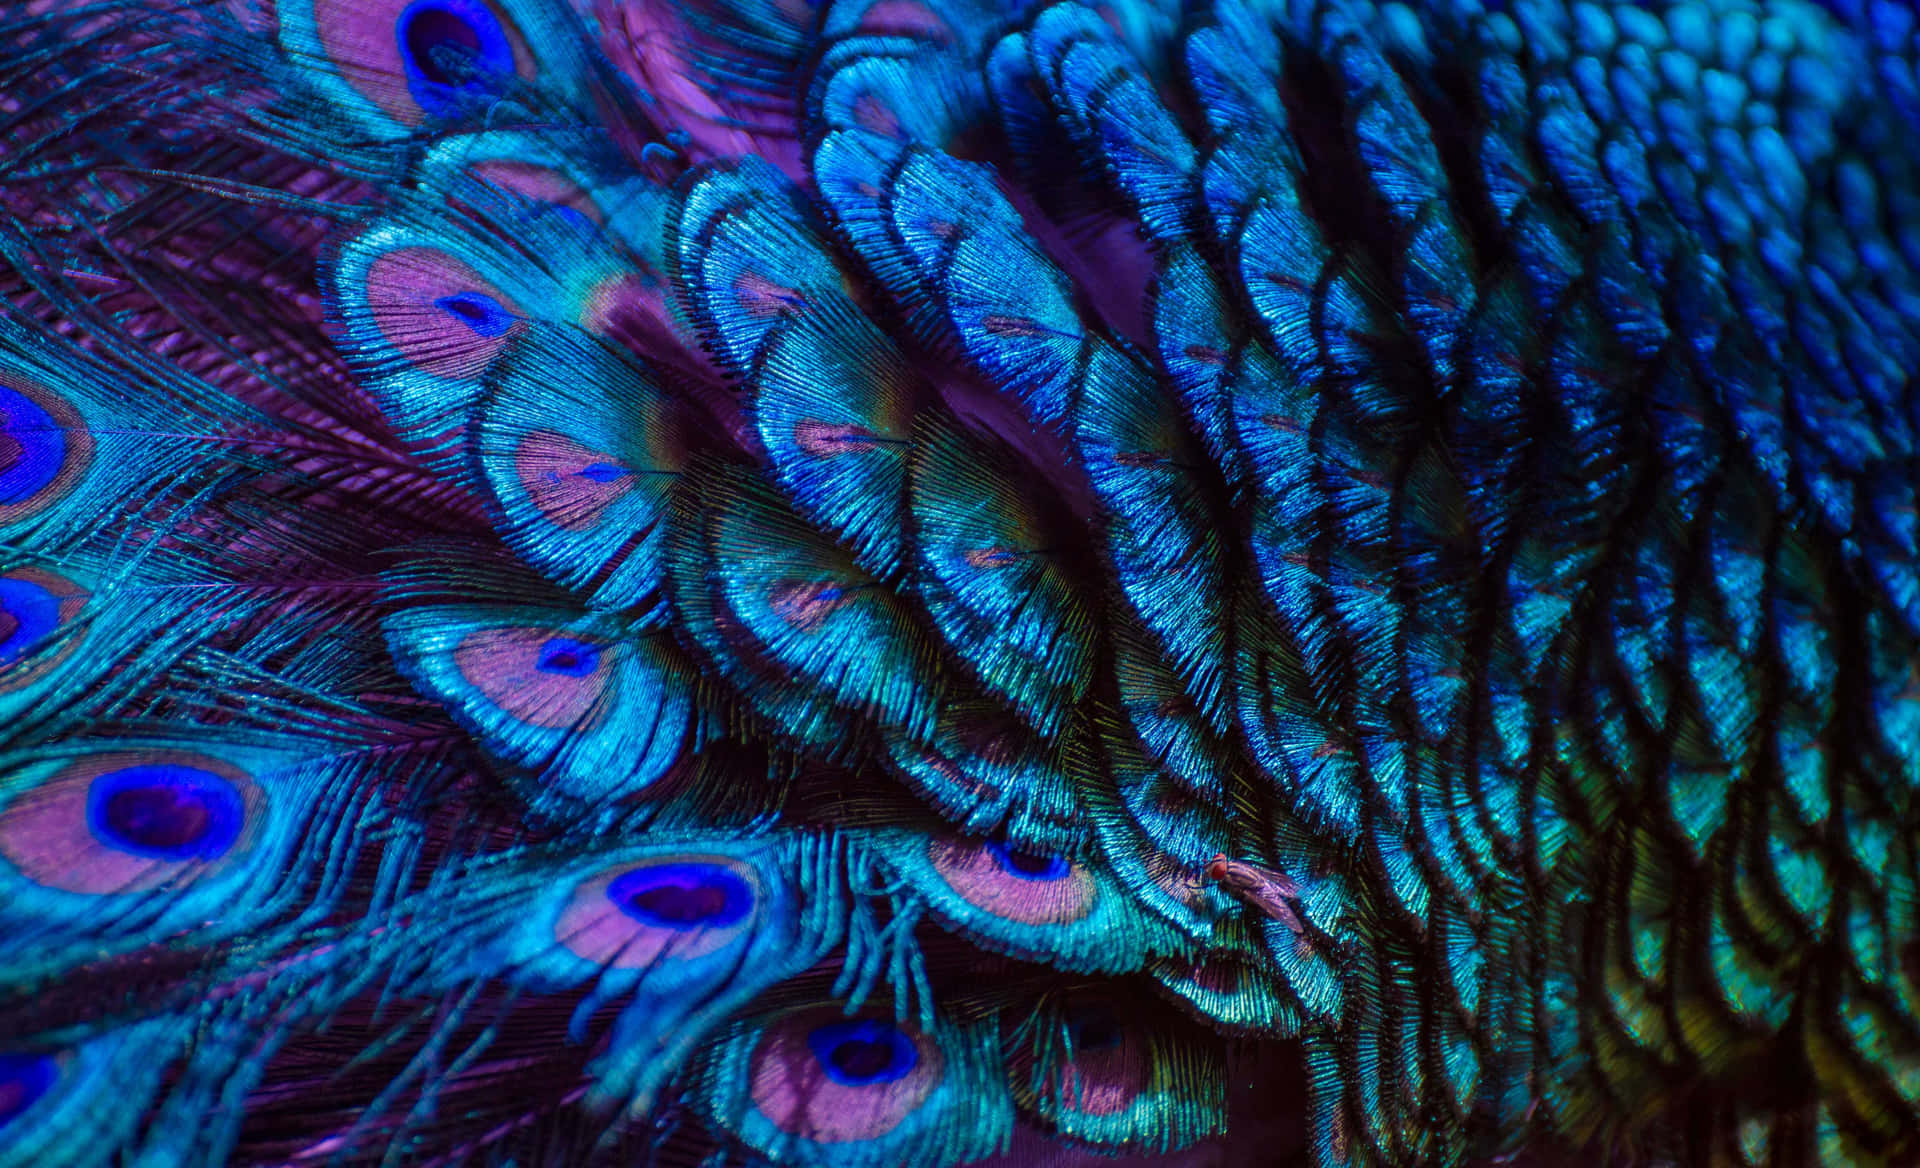 Vibrant Peacock Feathers Texture Wallpaper